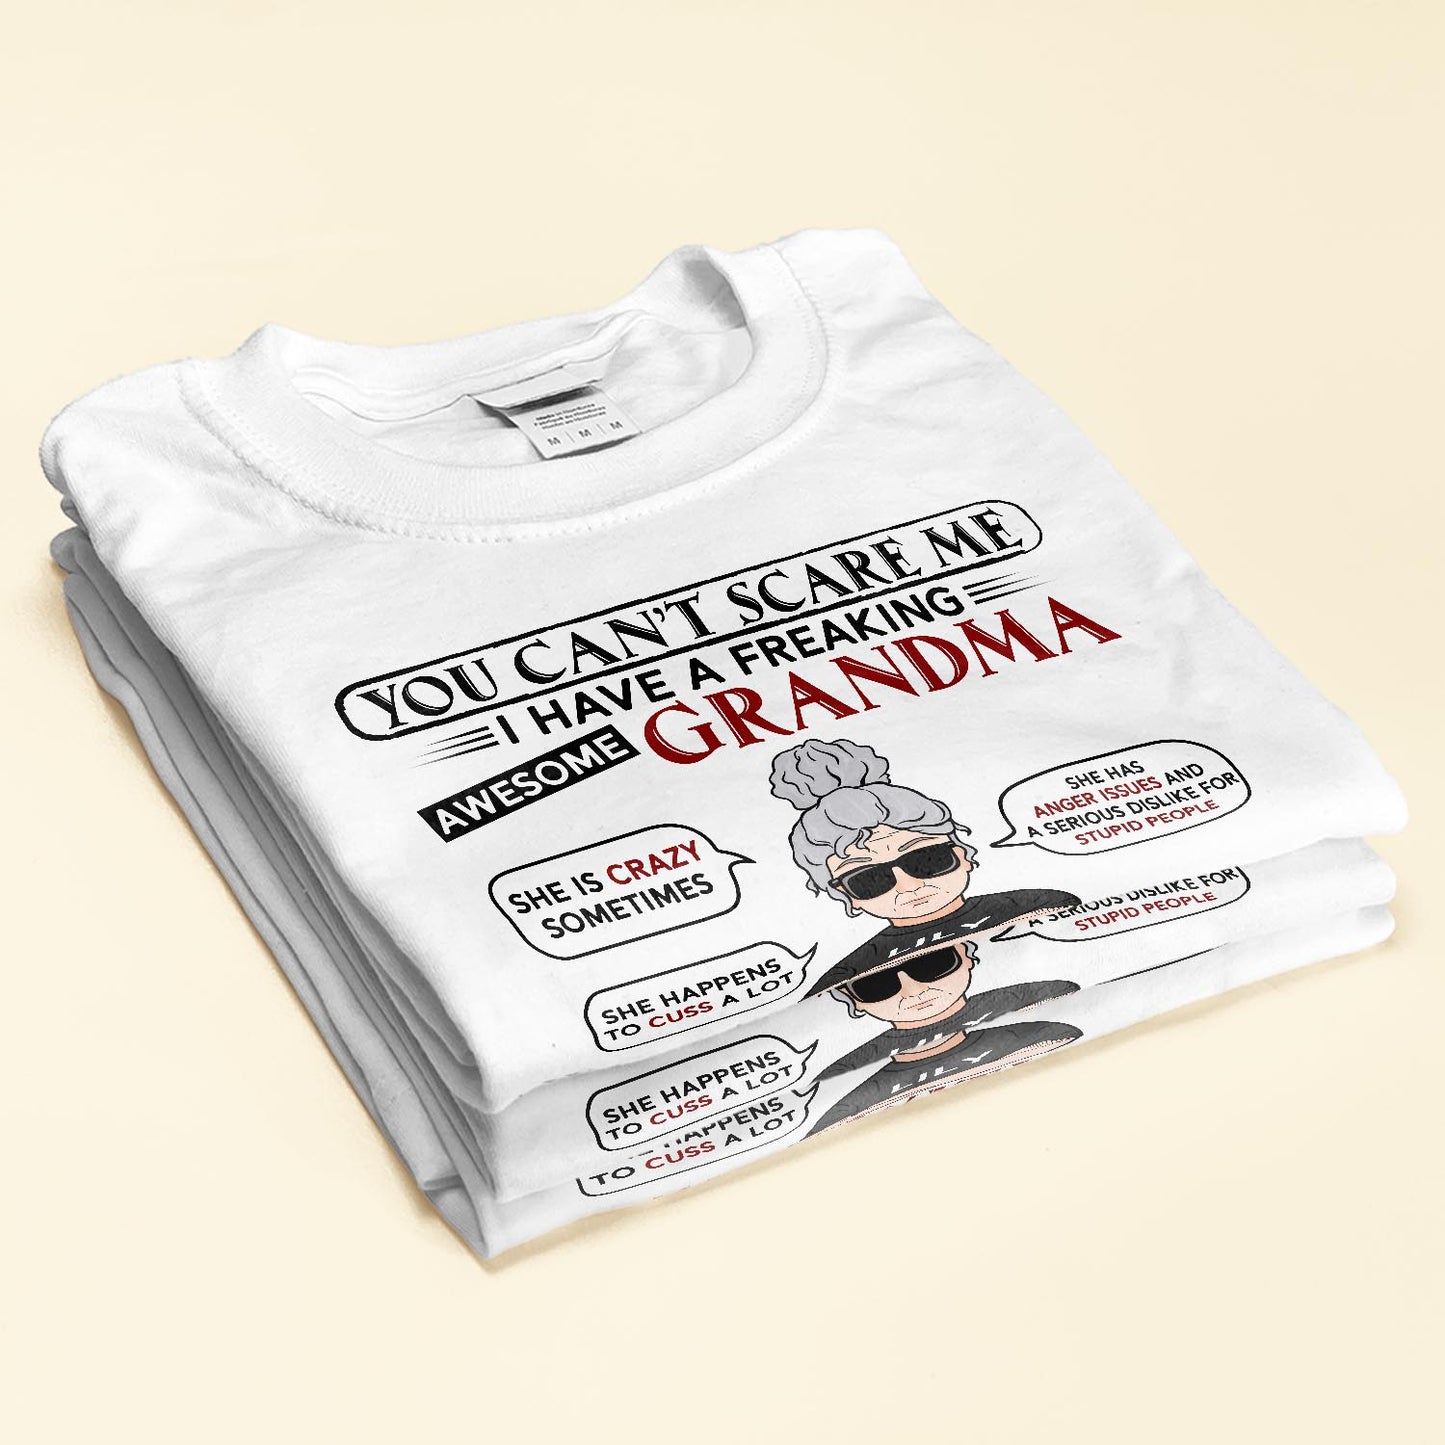 I Have A Freaking Awesome Grandma - Personalized Shirt - Birthday, Back To School Gift For Grandkids, Grandchildren, GrandSon, Granddaughter